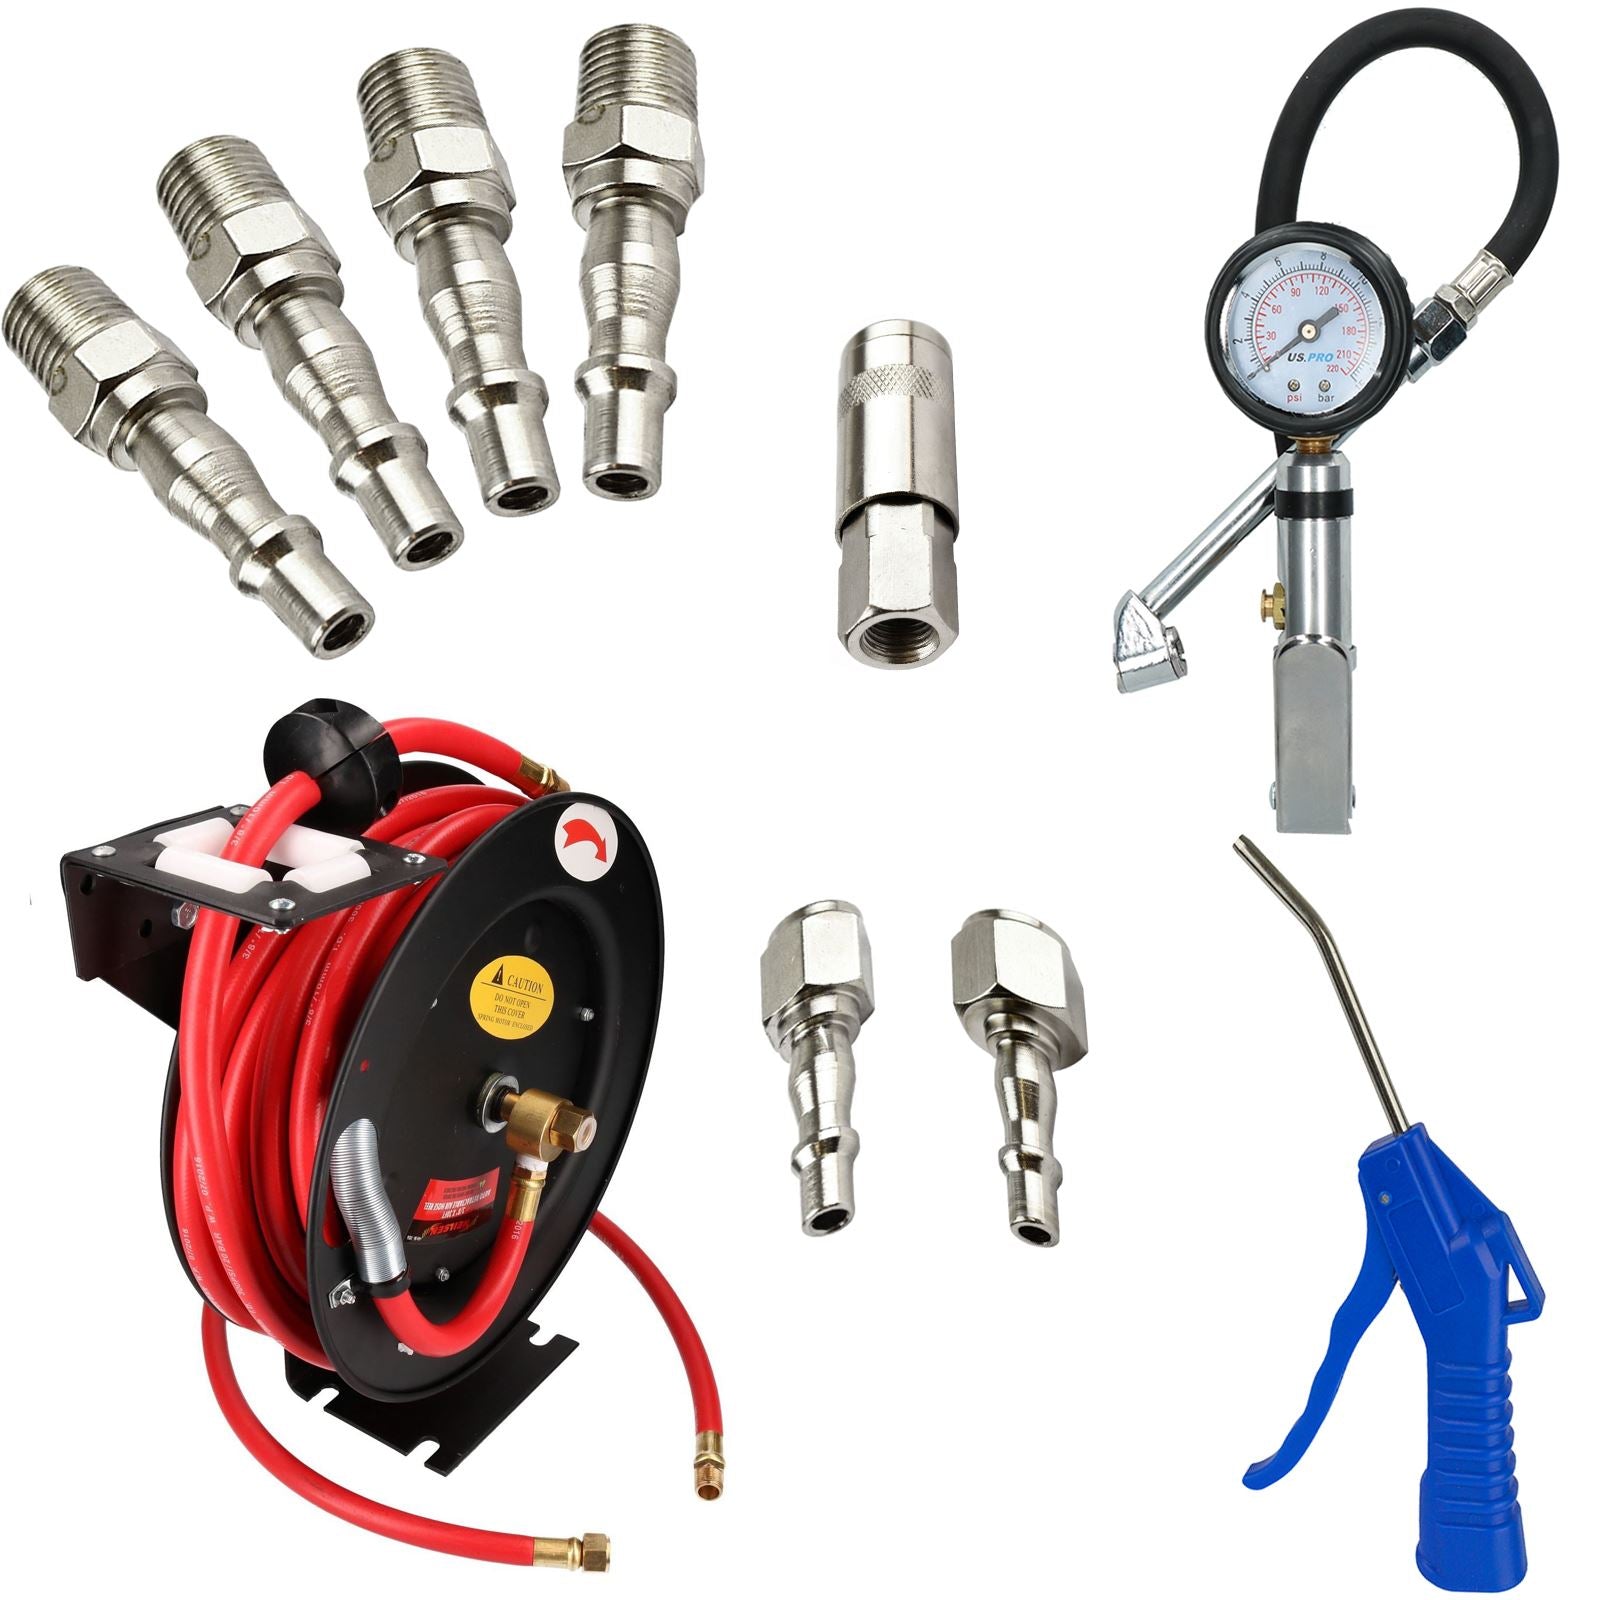 3/8" BSP Retractable Air Hose Kit With Fittings / Tyre Inflator / Blow Dust Gun